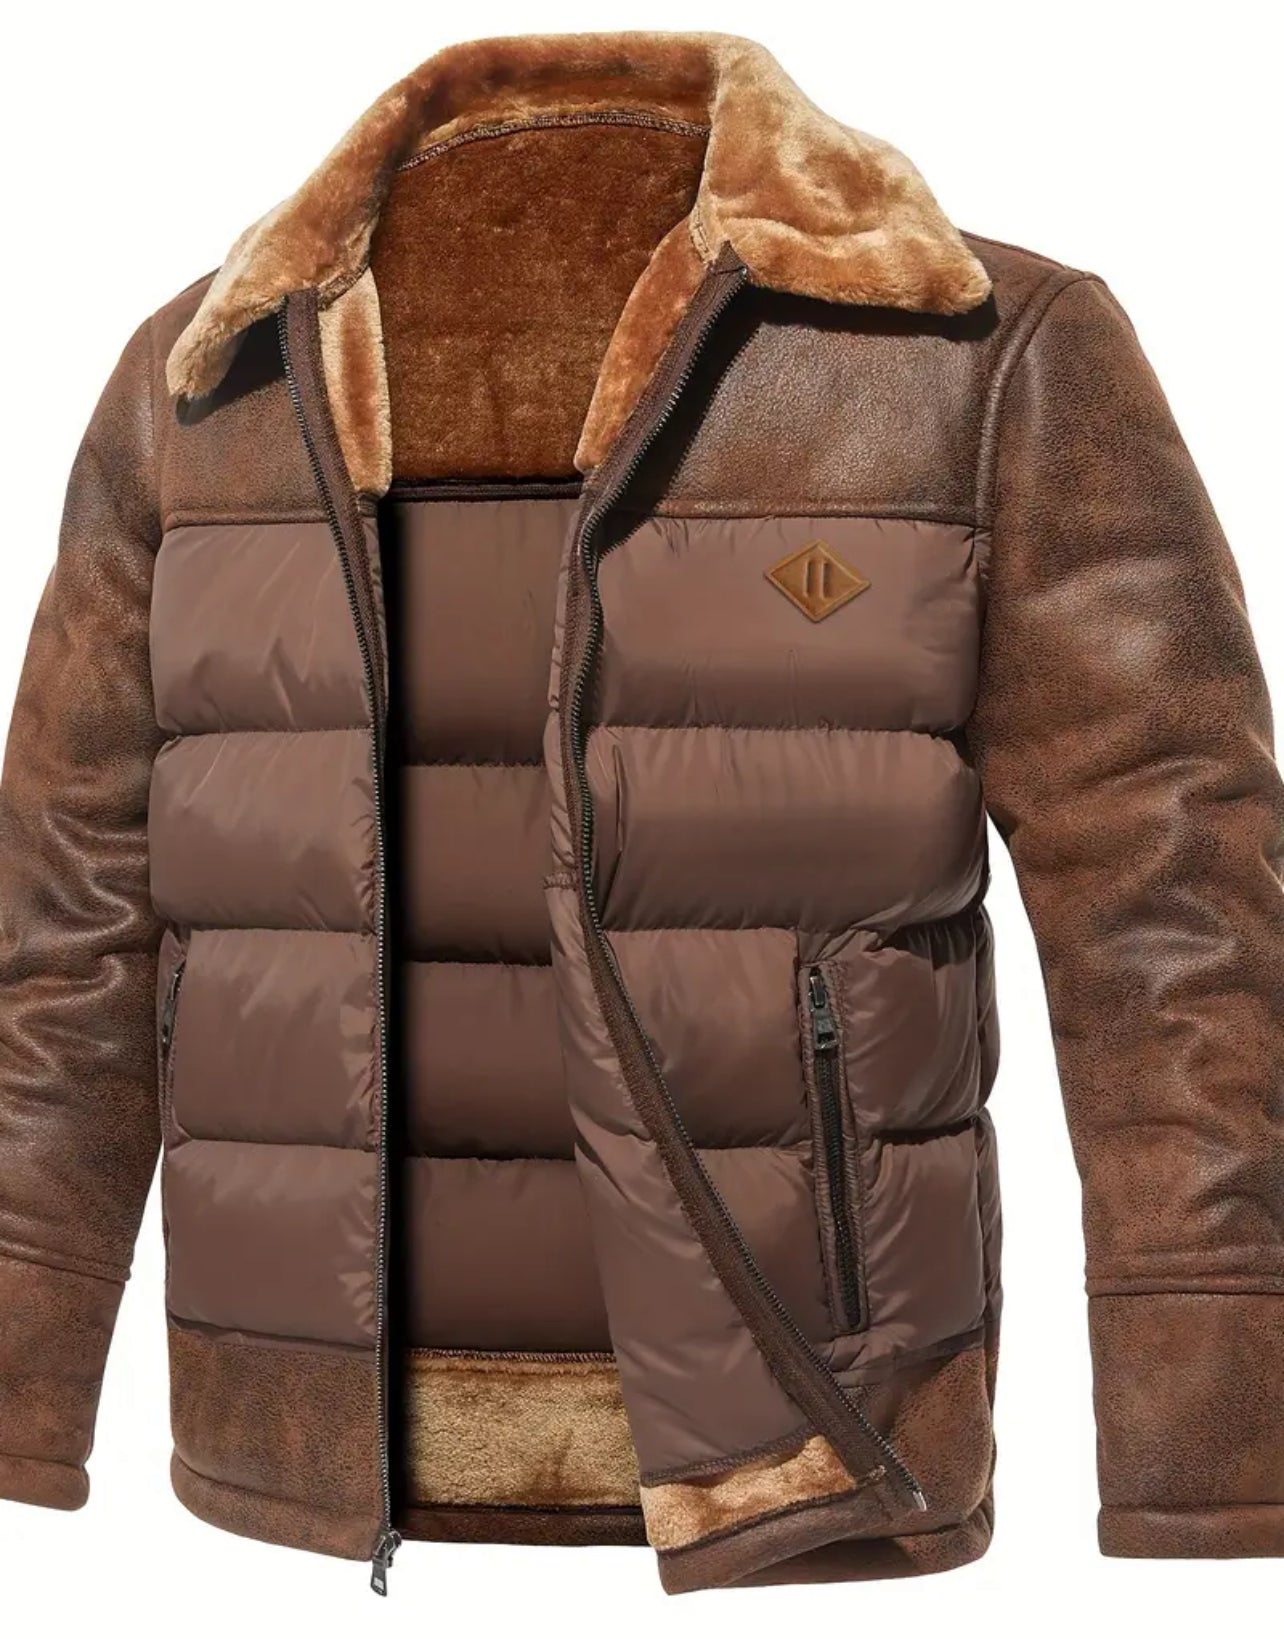 Men's Casual Warm Faux Leather Jacket, Chic Faux Fur Collar Quilted Jacket For Fall Winter